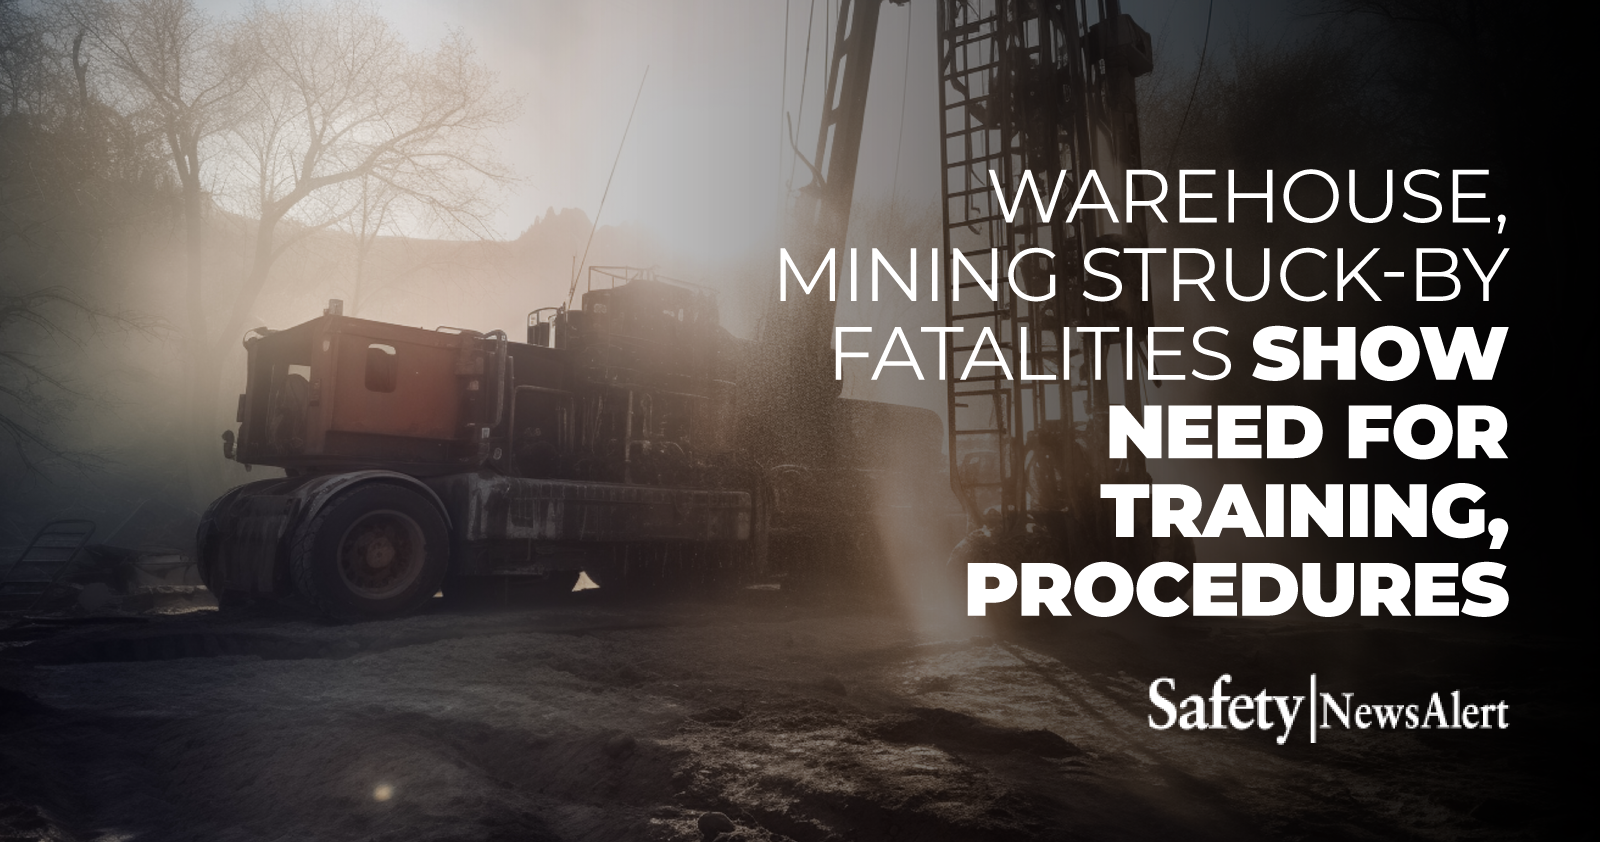 Warehouse, mining struck-by fatalities show need for training, procedures